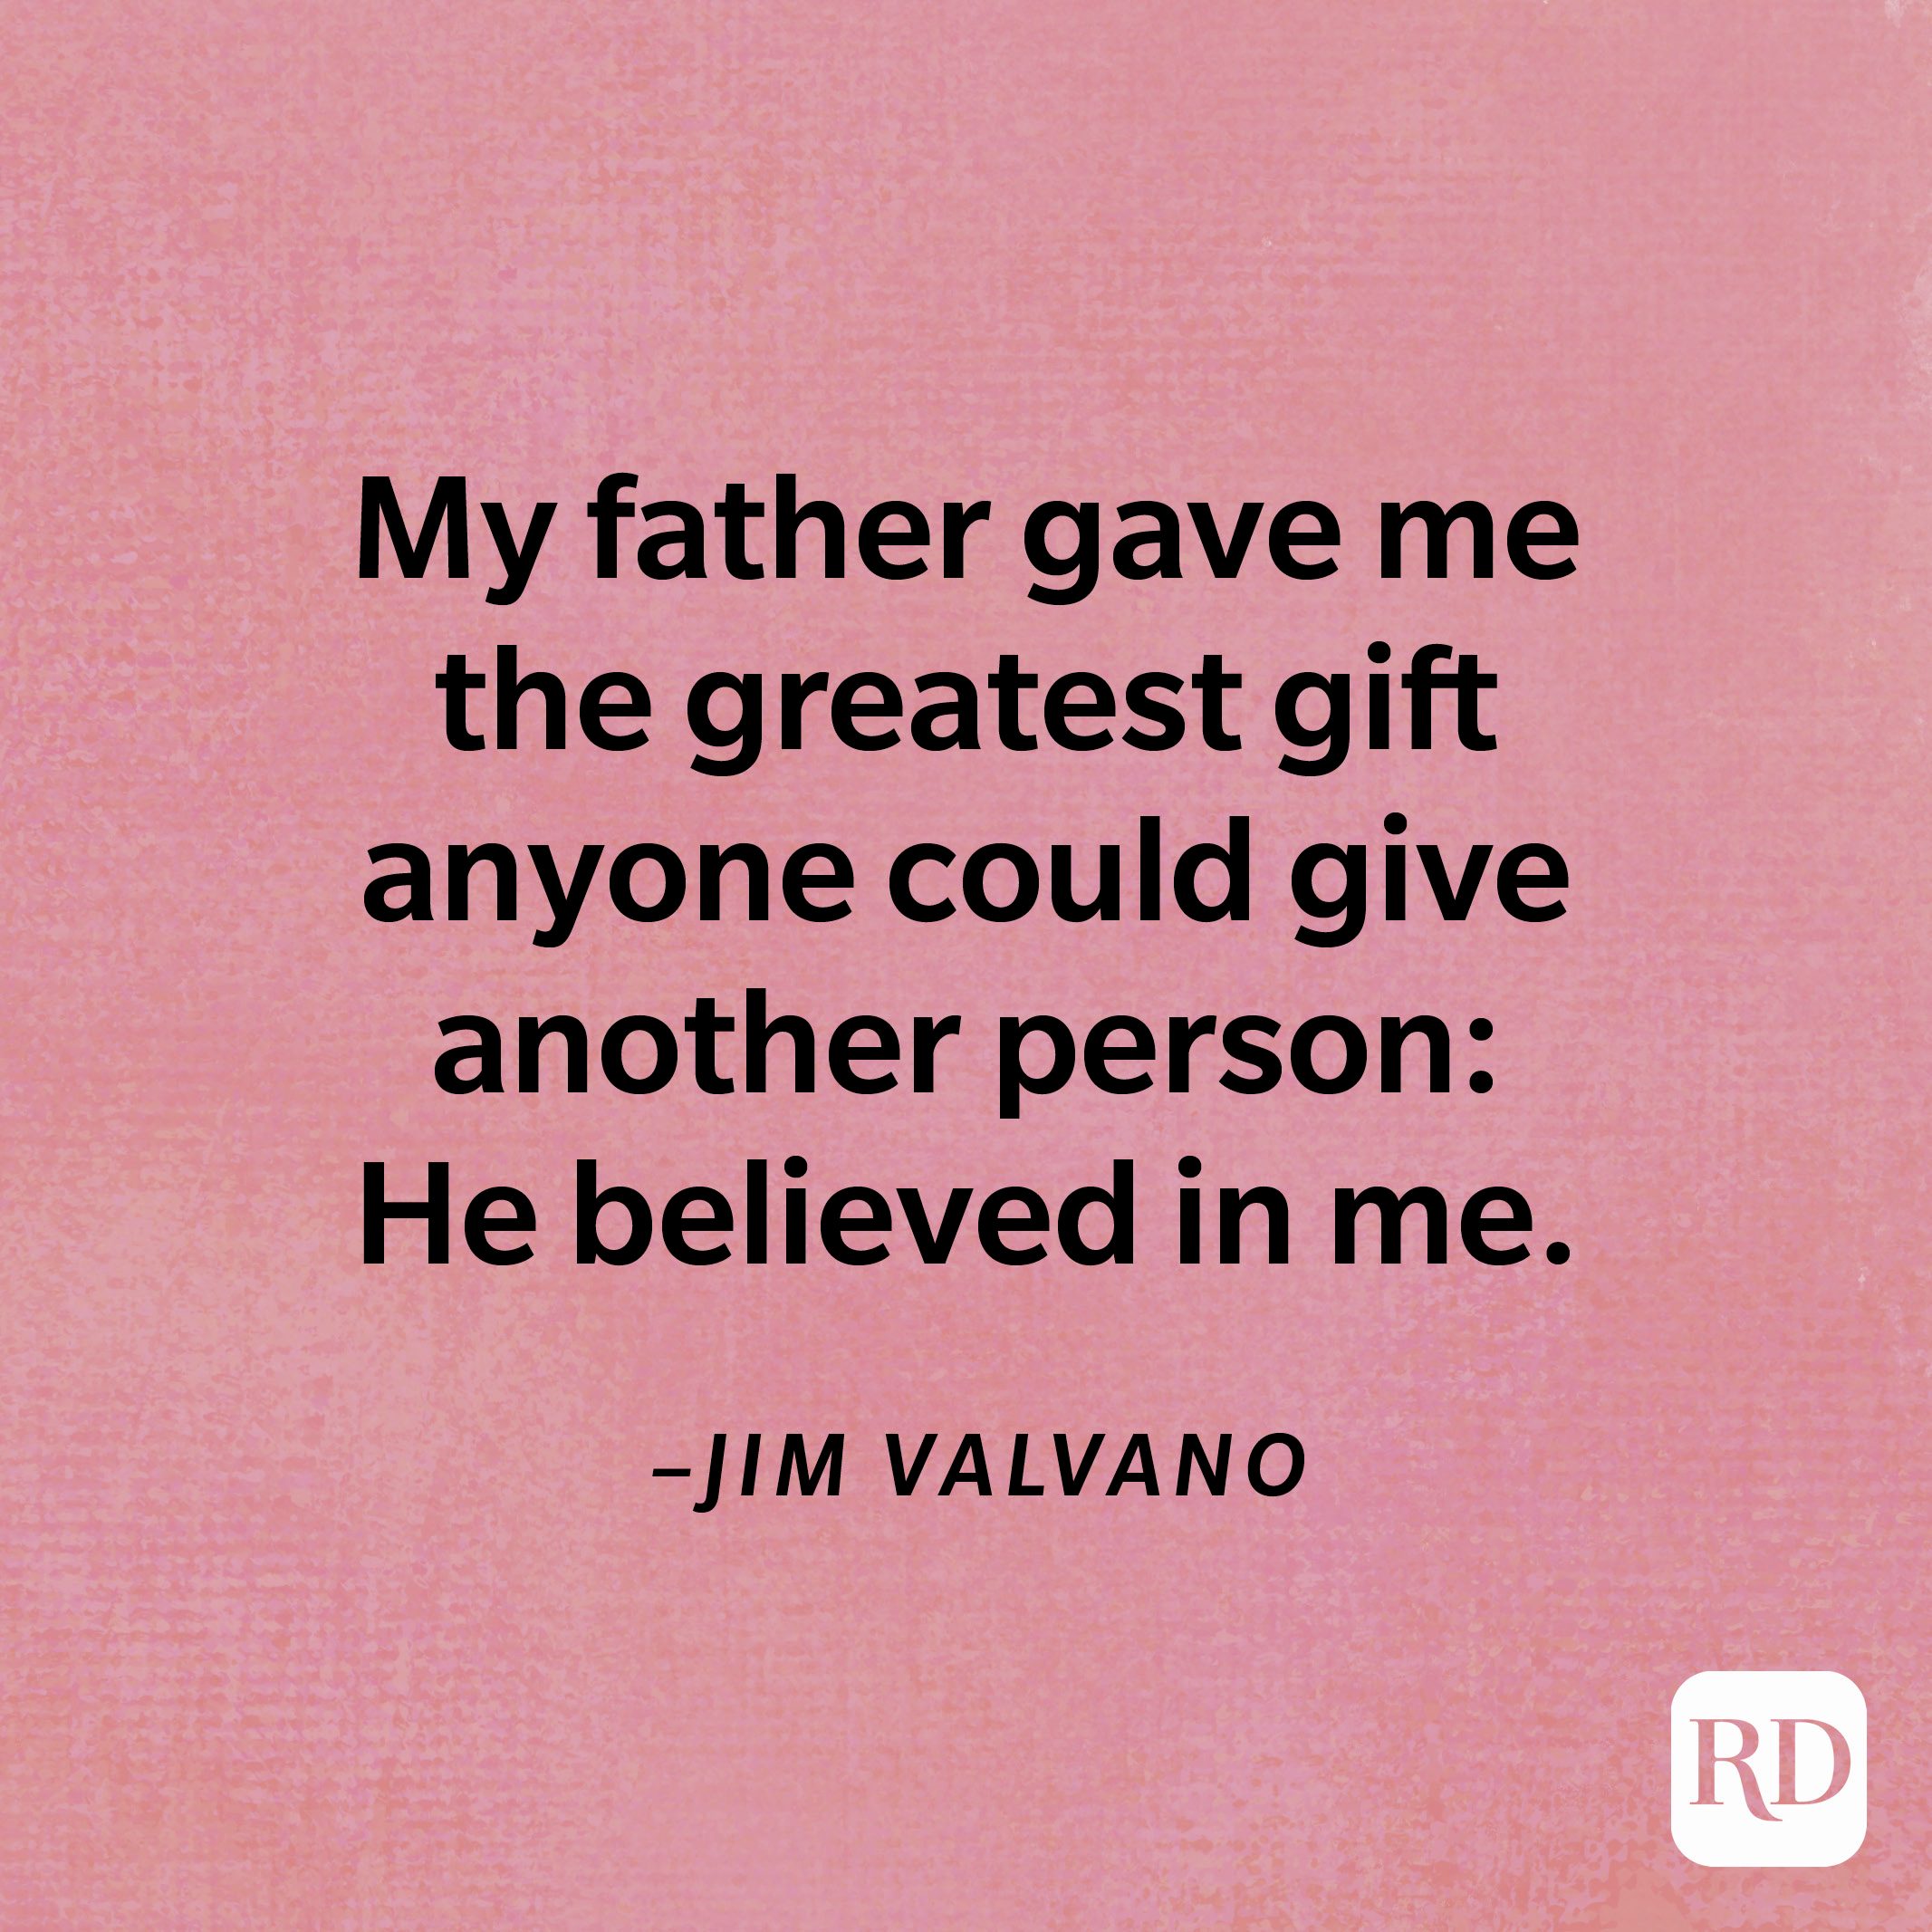 “My father gave me the greatest gift anyone could give another person: He believed in me.”—Jim Valvano